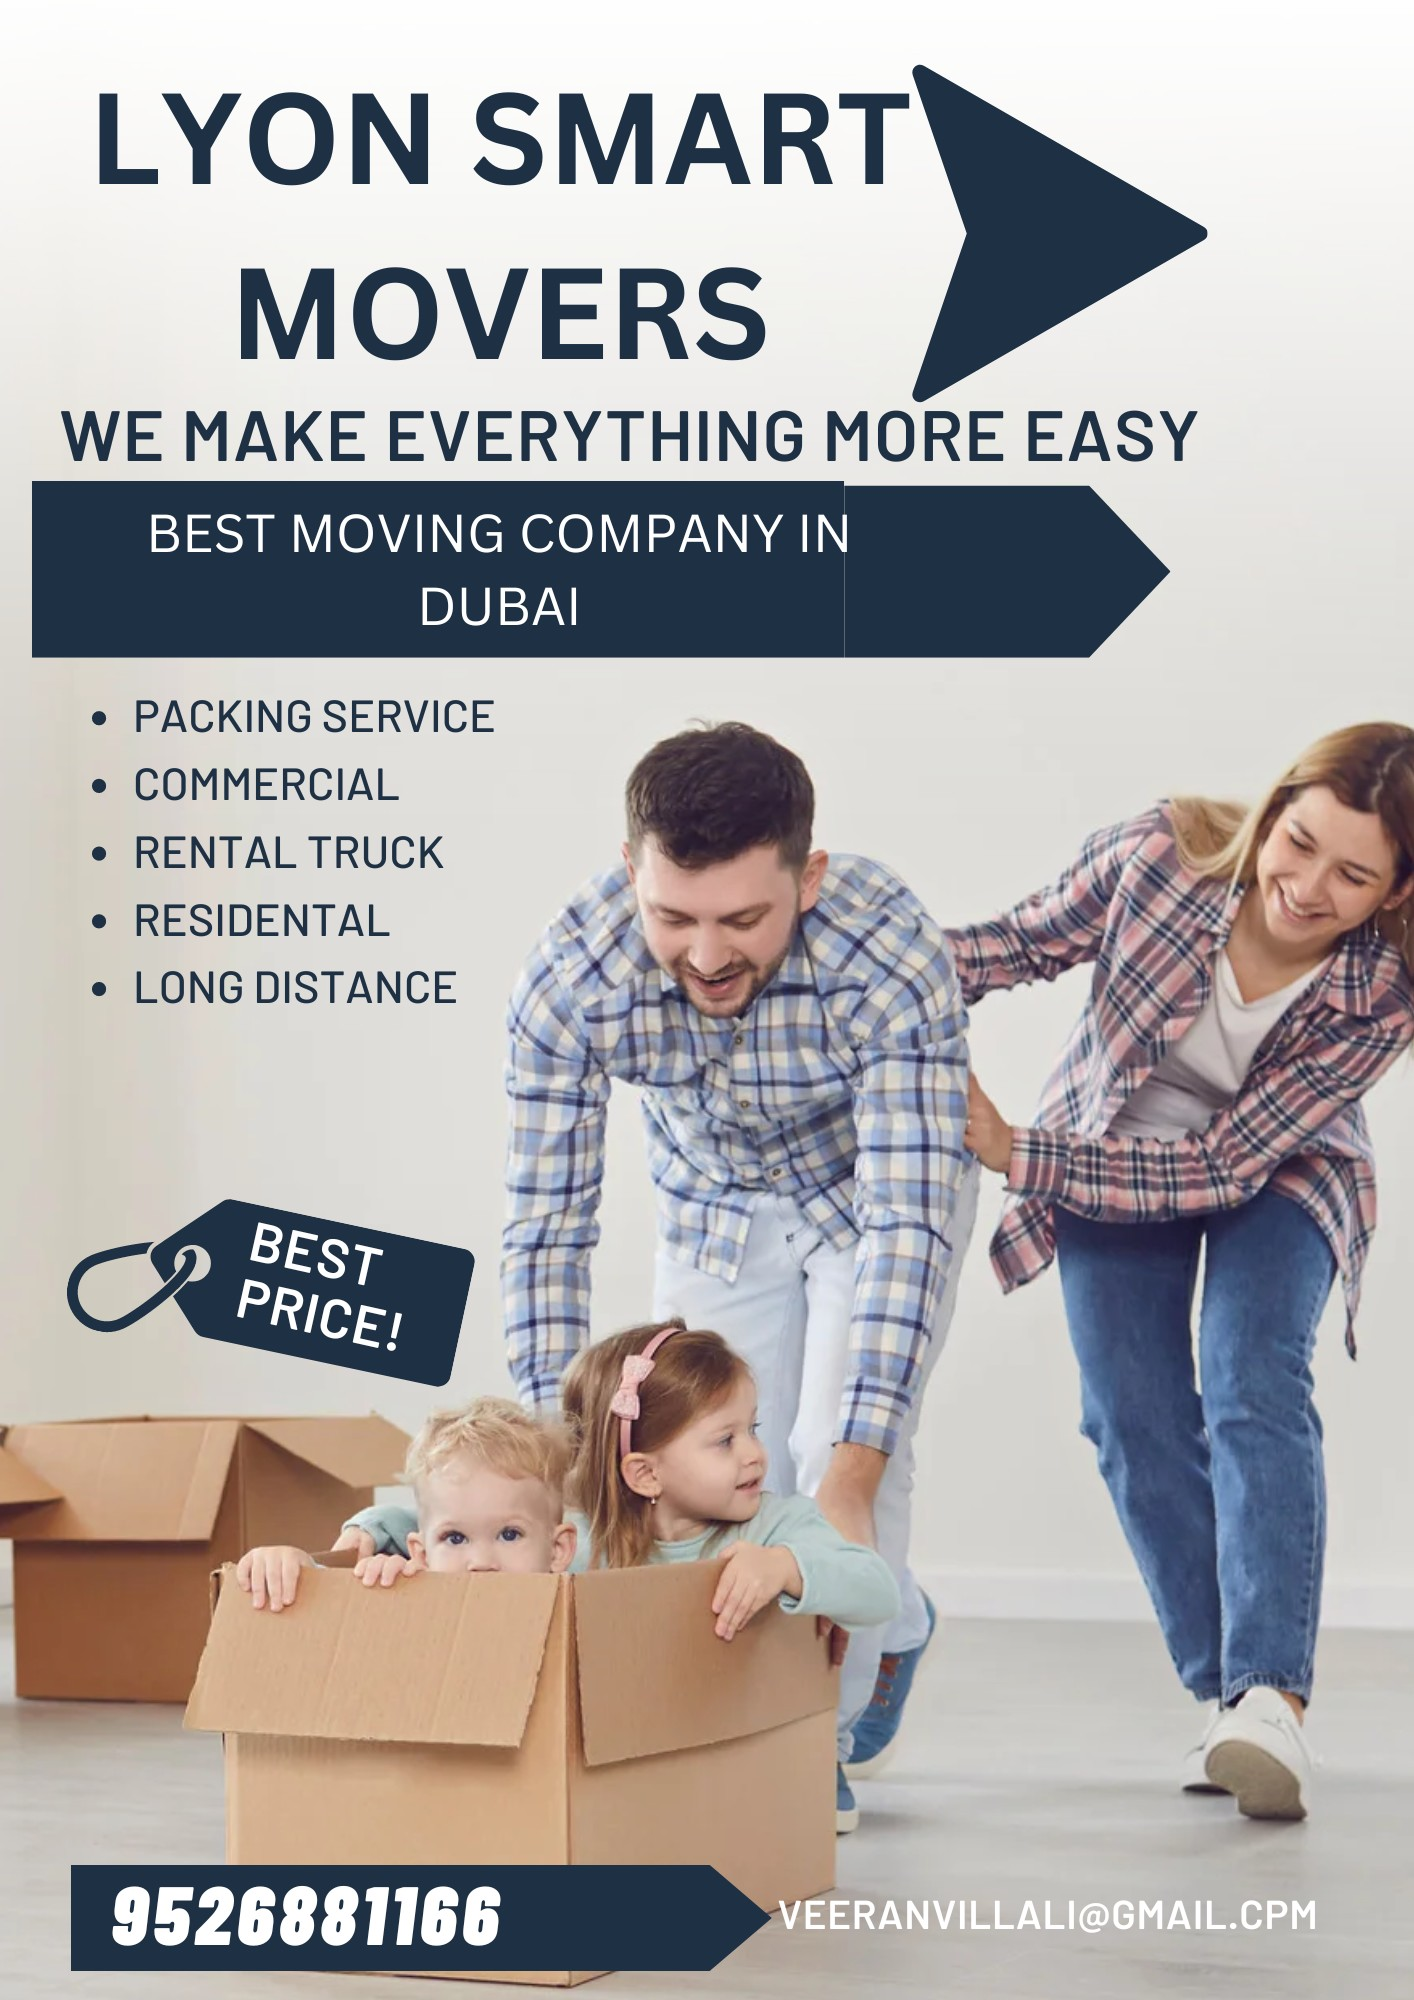 Top 5 Picks: The Best Moving Companies in Dubai